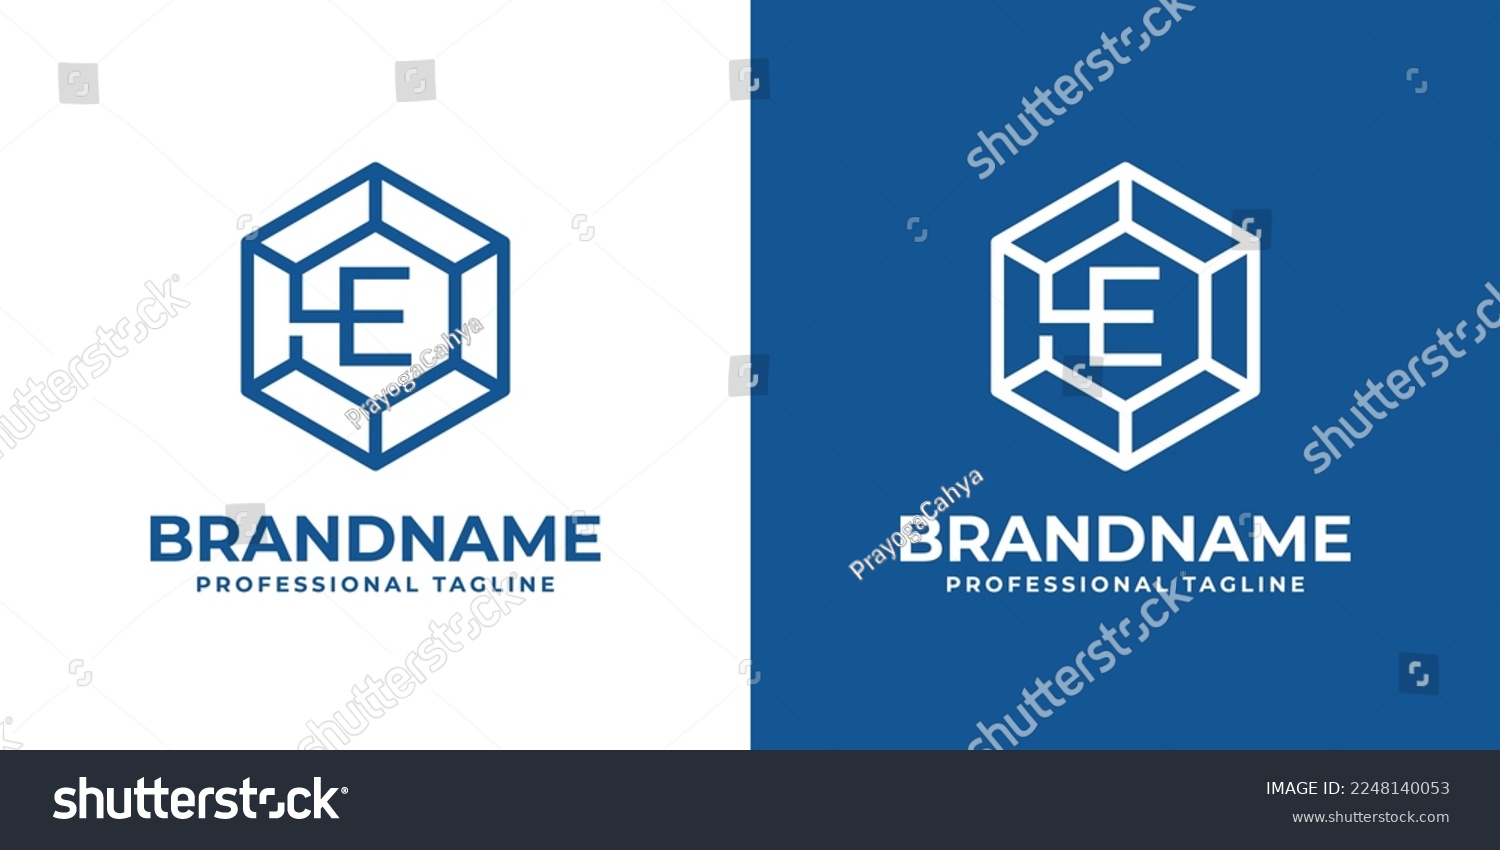 SVG of Initial E Hexagon Diamond Logo, suitable for any business with E initial. svg